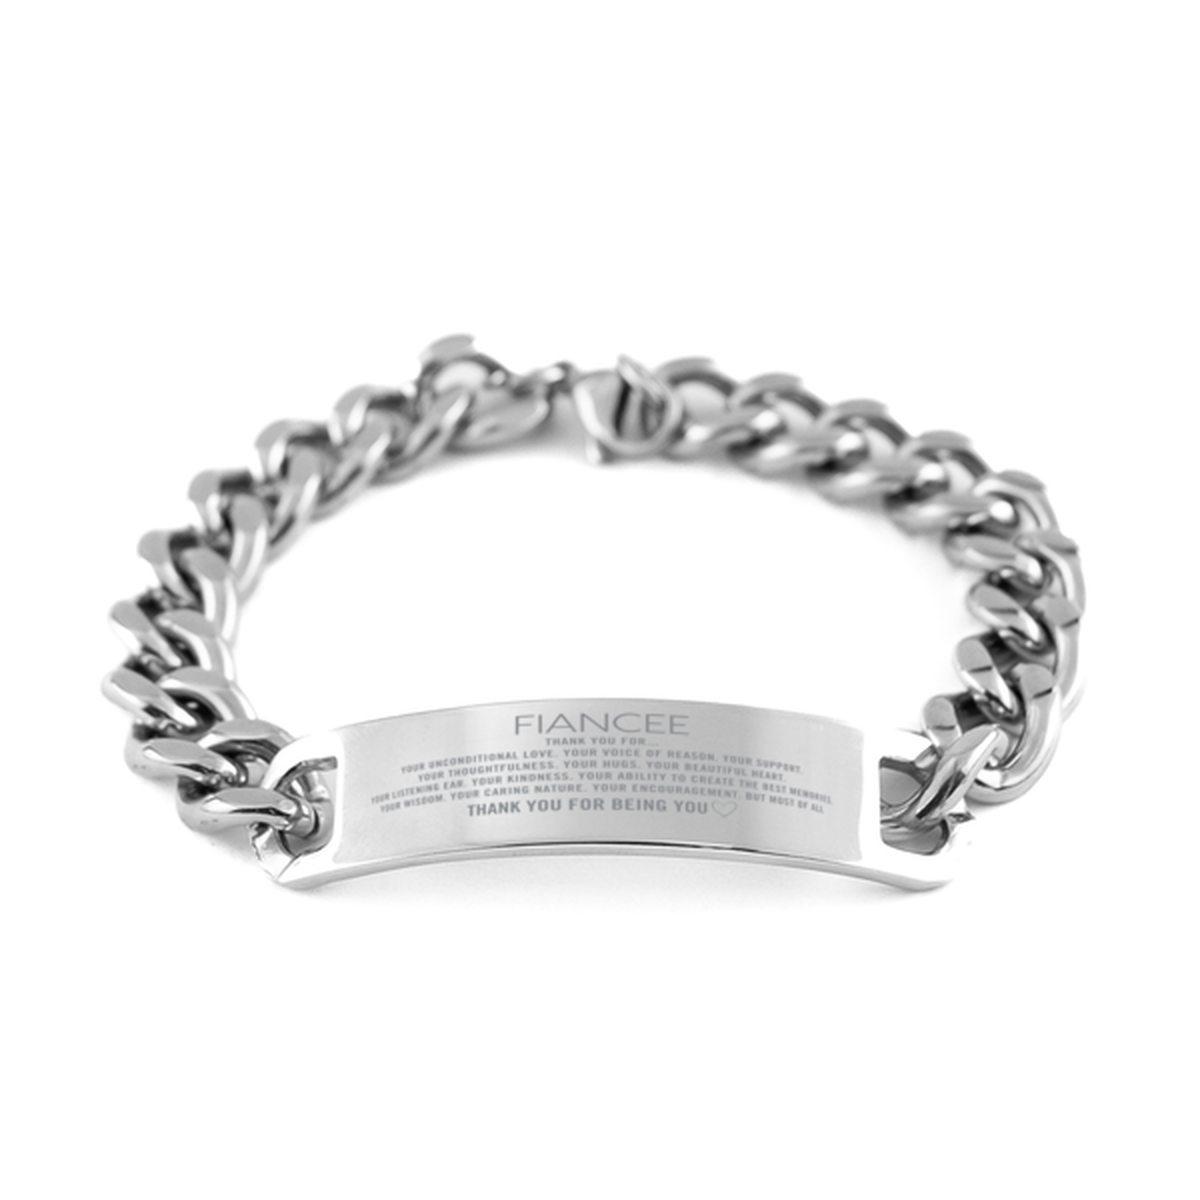 Fiancee Cuban Chain Stainless Steel Bracelet Custom, Engraved Gifts For Fiancee Christmas Graduation Birthday Gifts for Men Women Fiancee Thank you for Your unconditional love